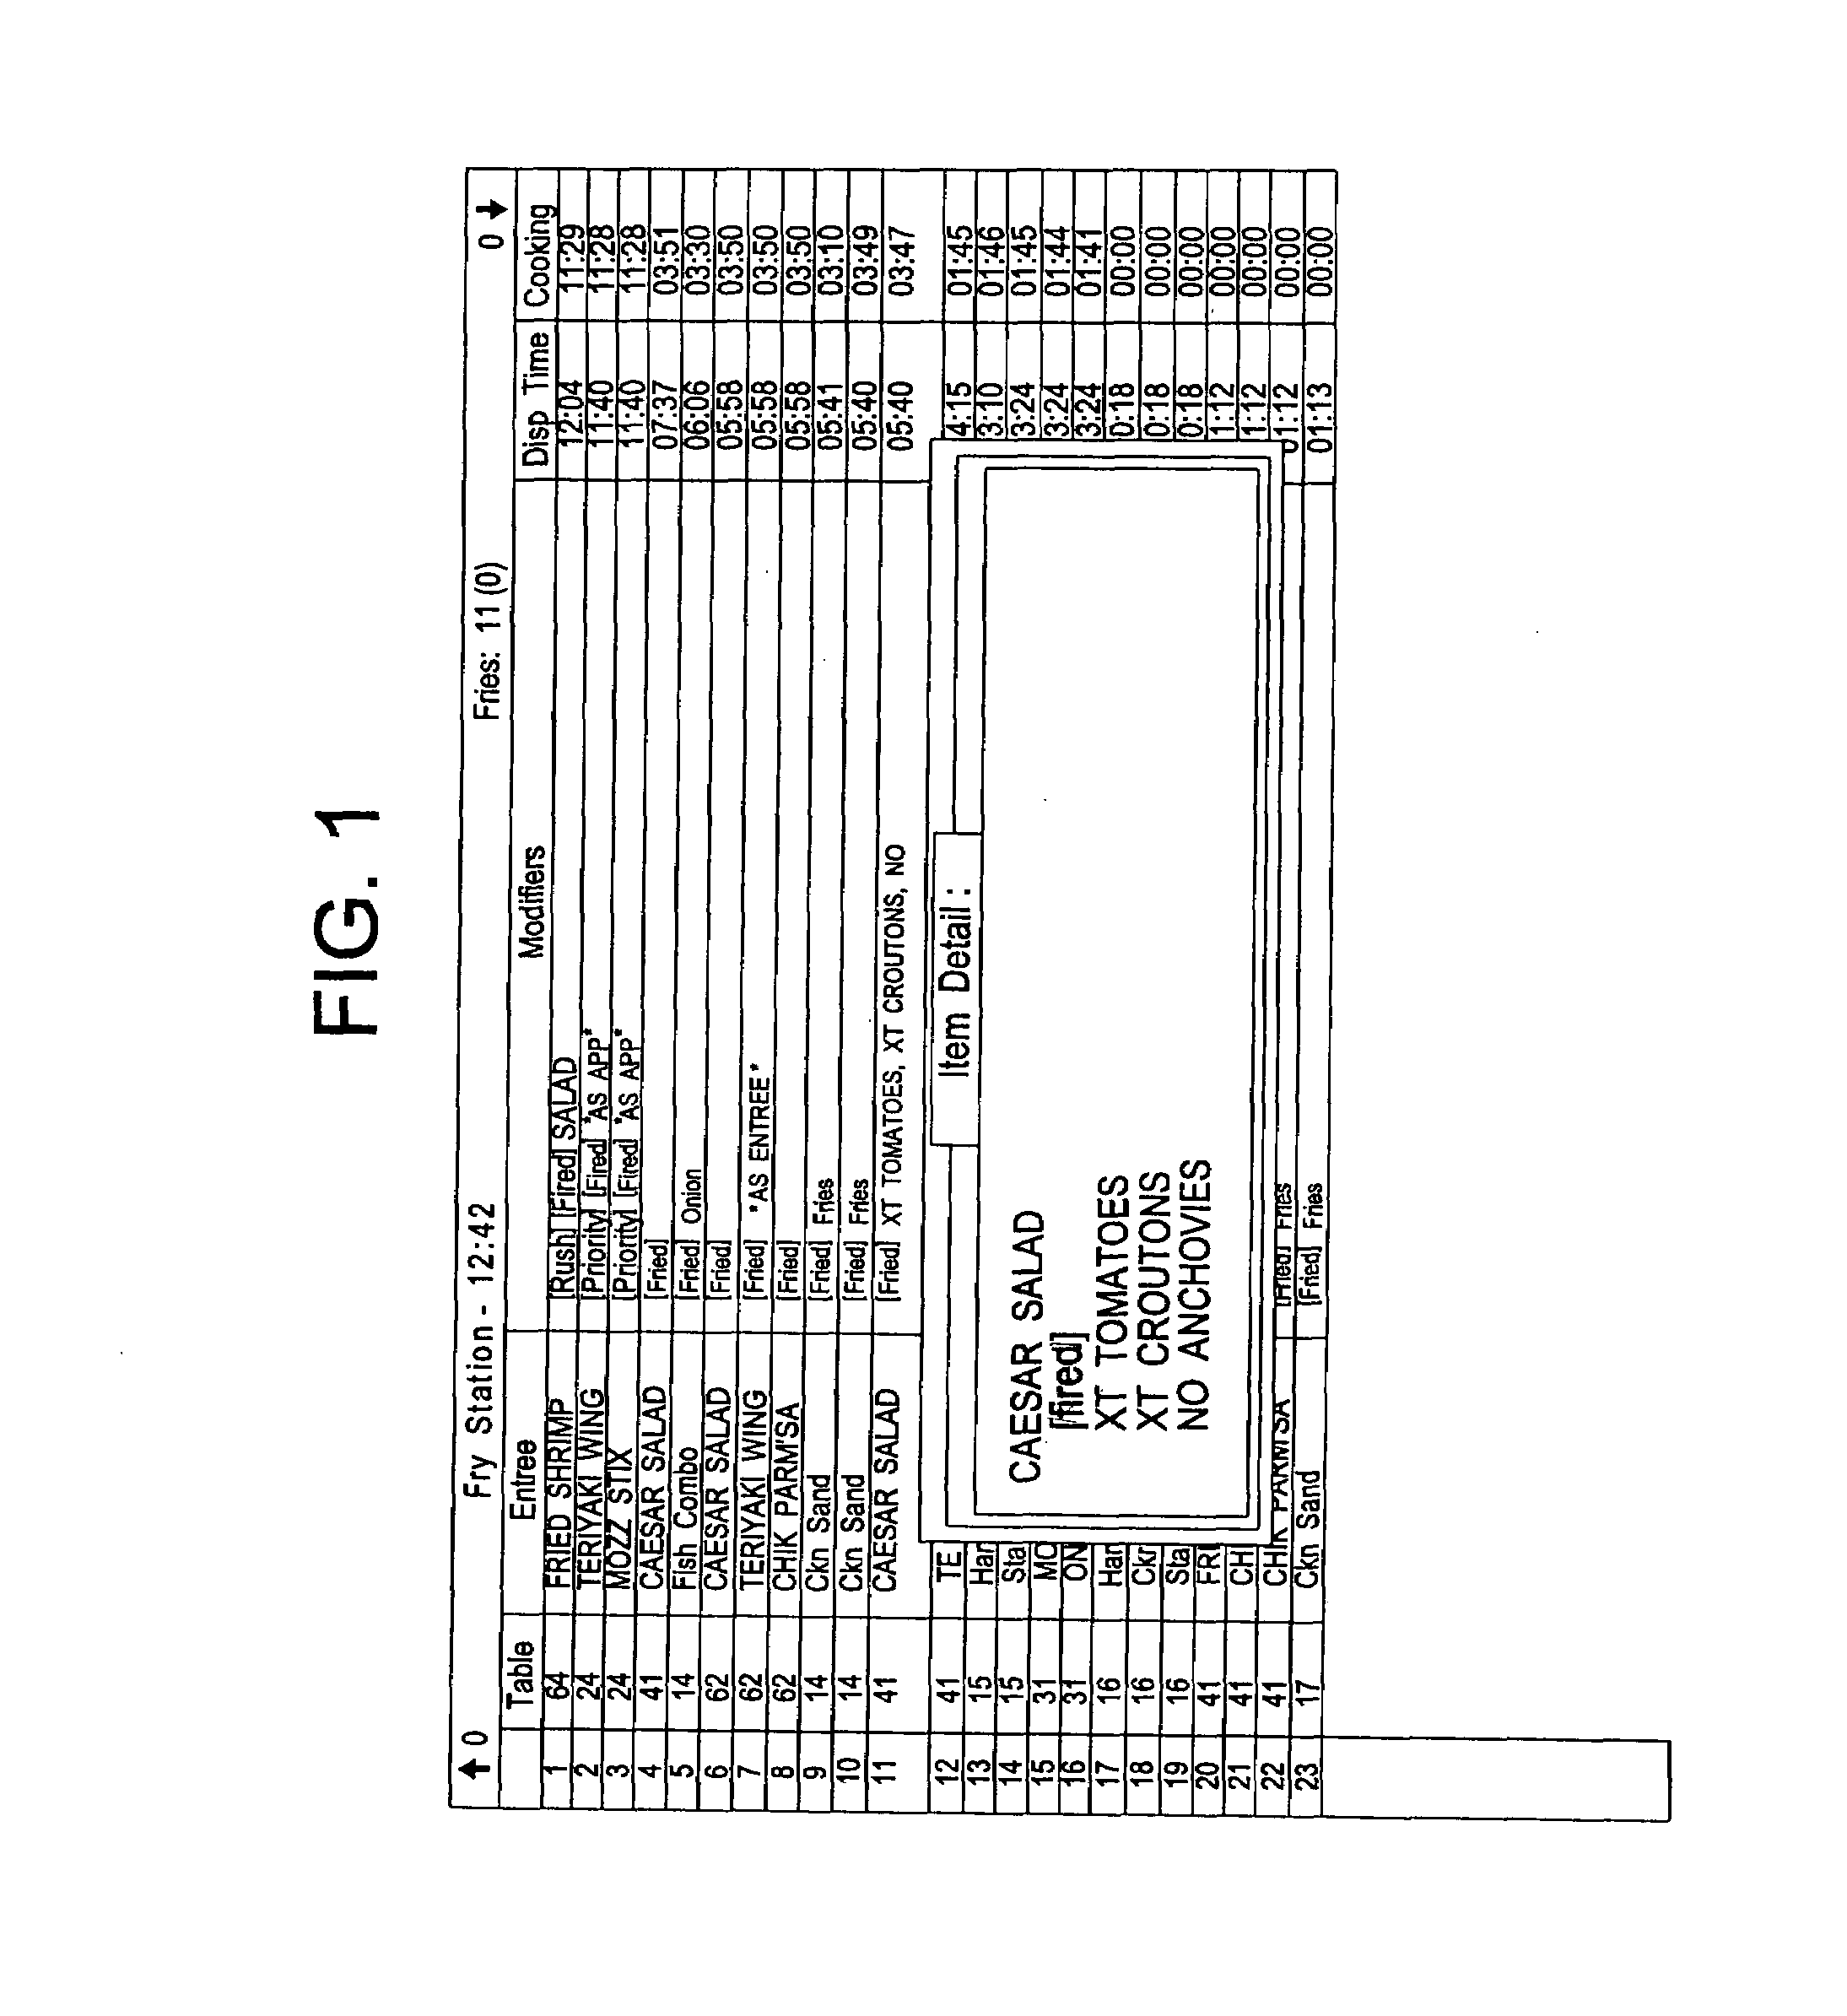 Method of dynamically routing food items through a restaurant kitchen